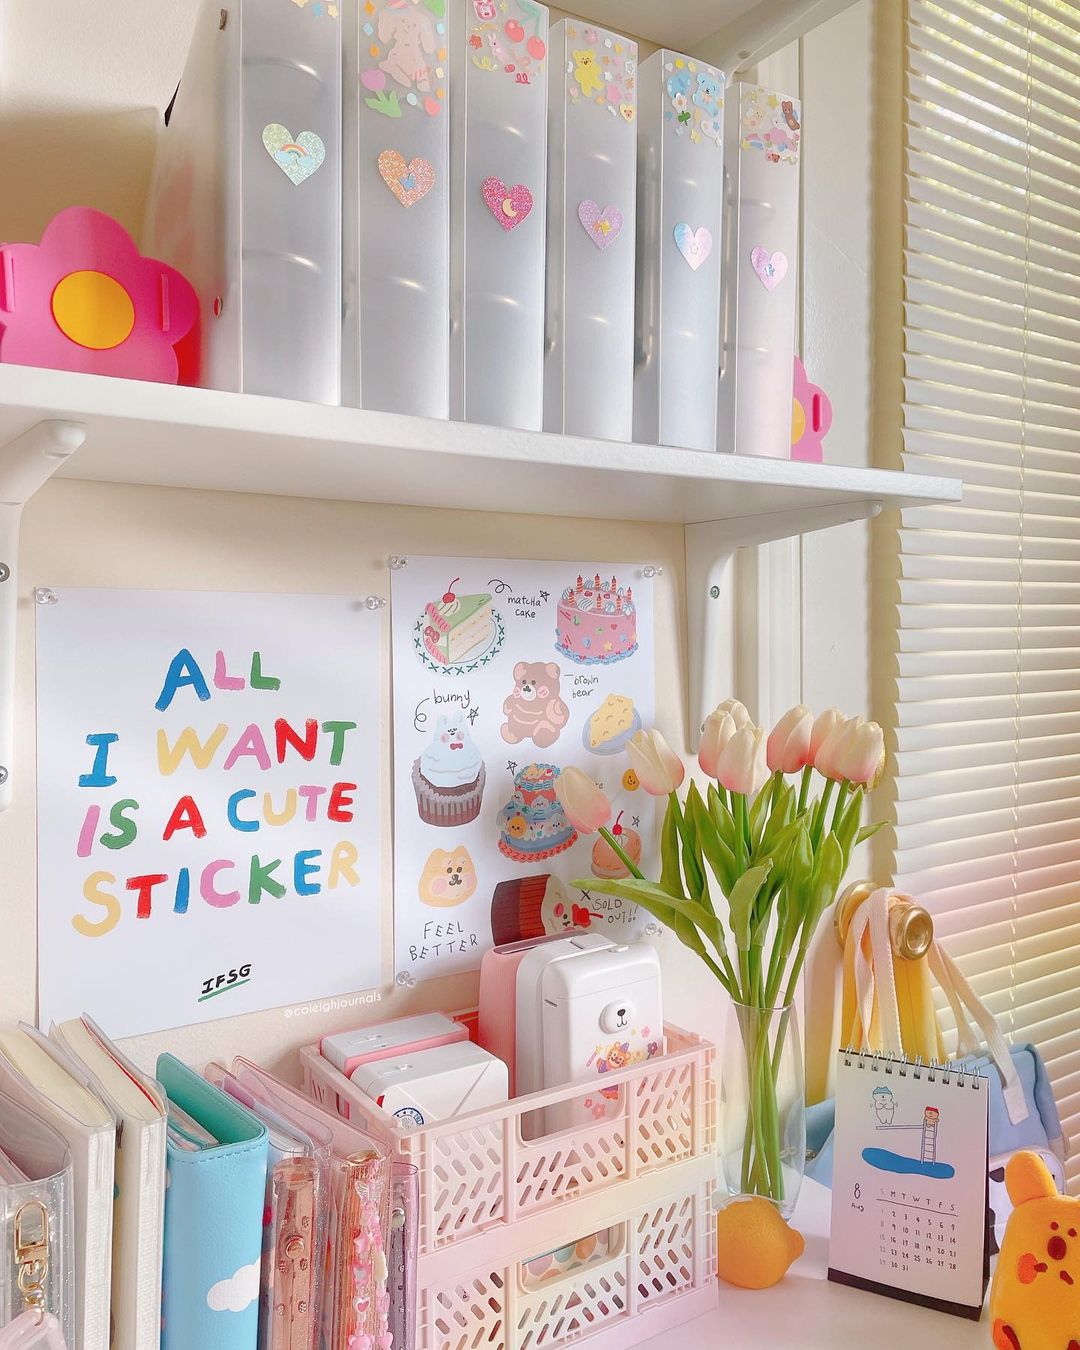 25 Kawaii Desk Accessories for the Cutest Desk Makeover